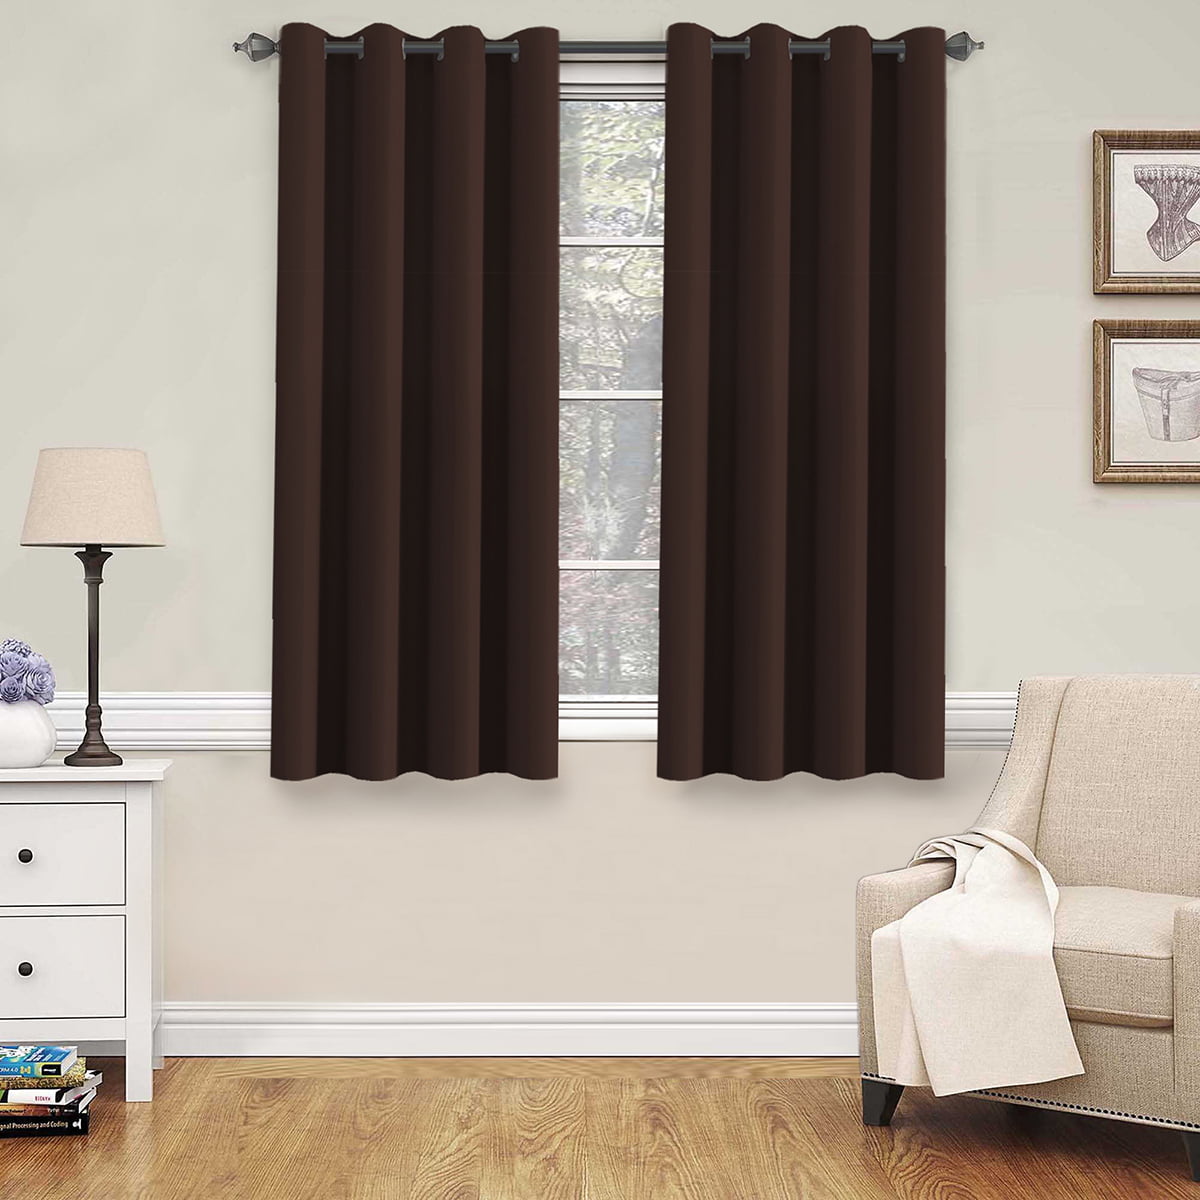 H.Versailtex Blackout Thermal Insulated Curtains For Bedroom /Living